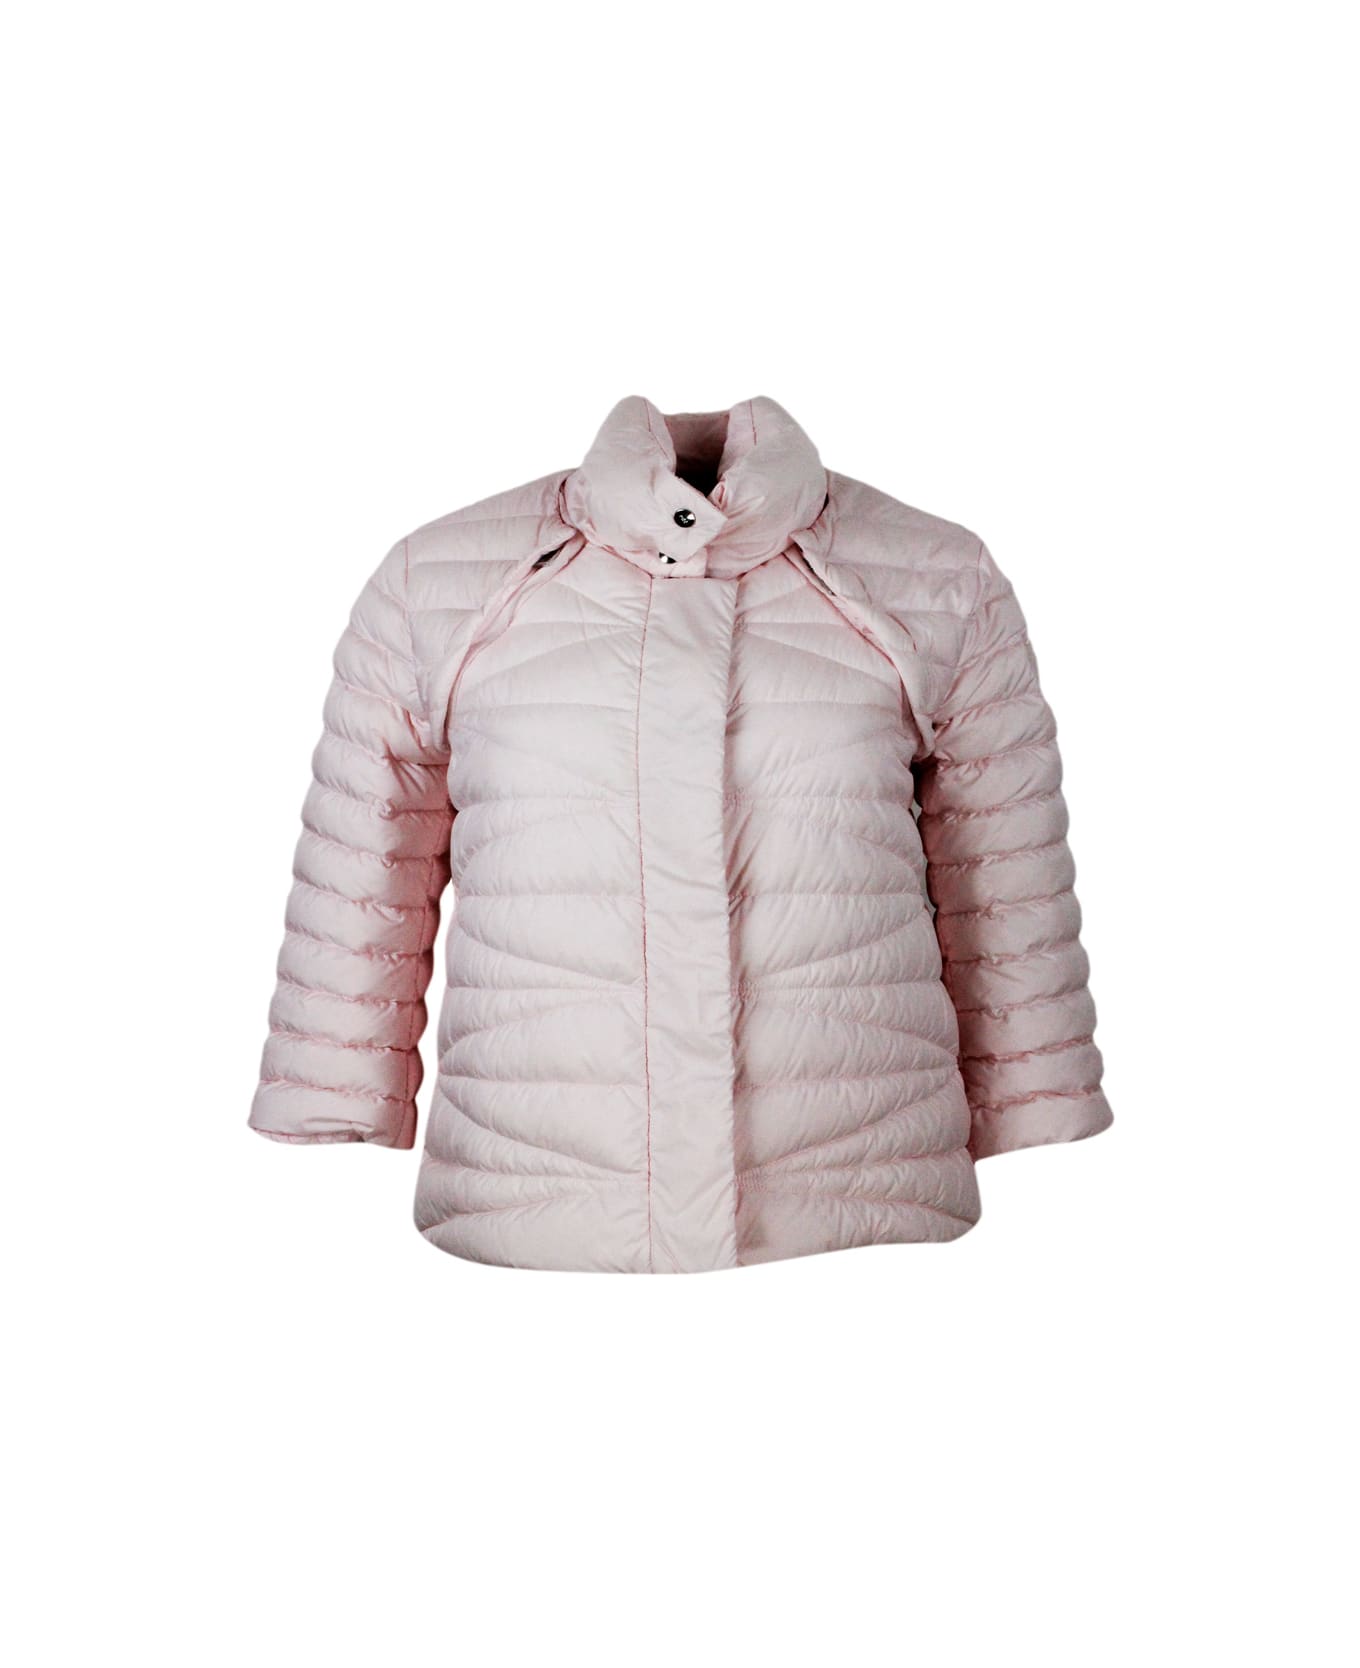 Add 100 Gram Down Jacket With High Quality Feathers. The Sleeves Are Detachable With A Convenient Zip. Side Pockets And Zip And Button Closure - Pink ダウンジャケット